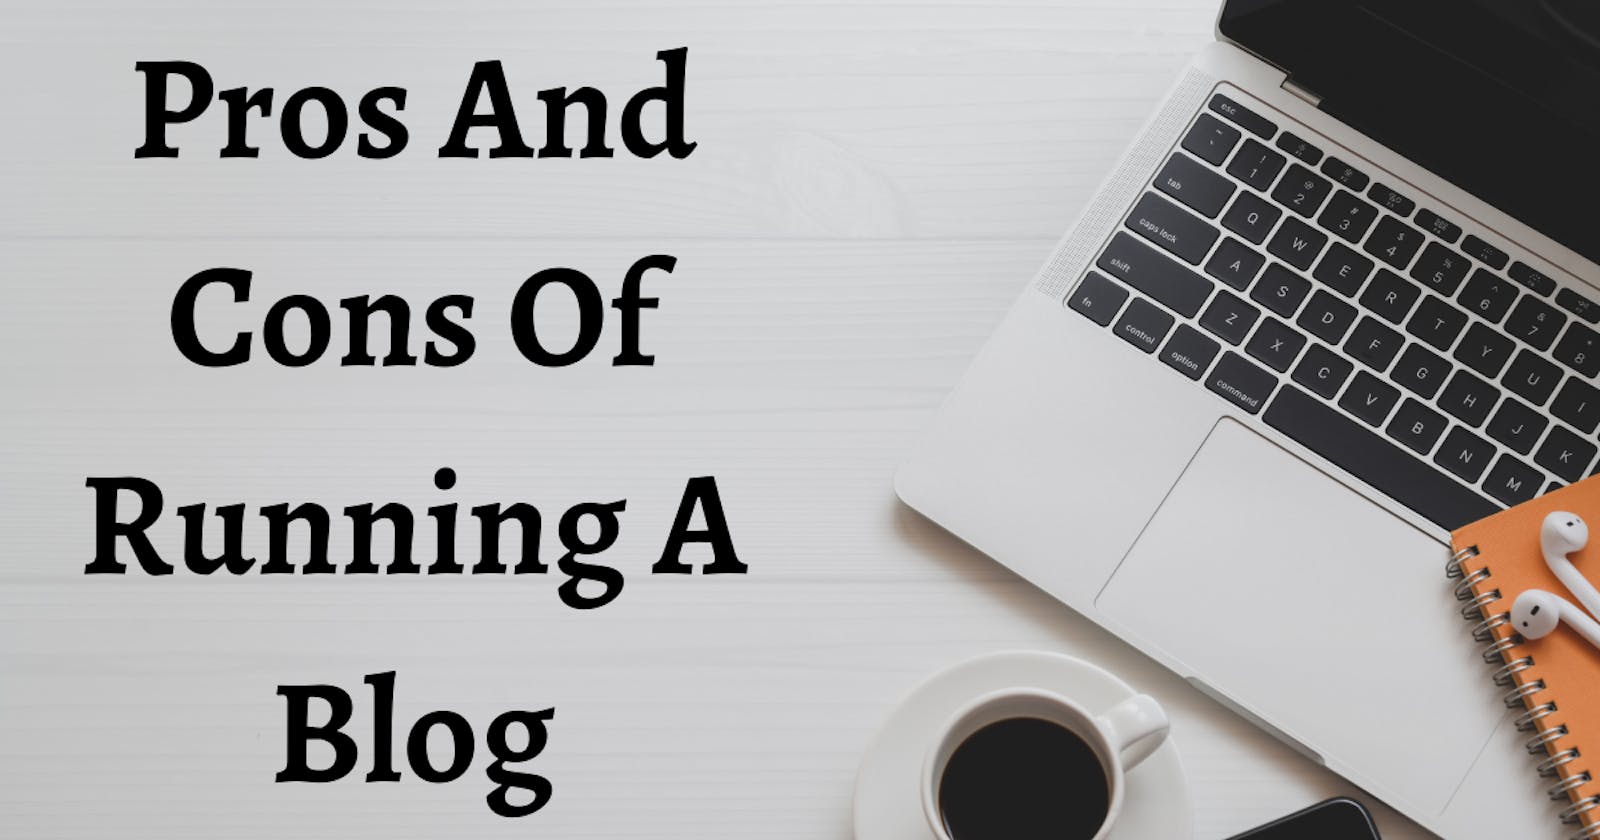 Pros And Cons Of Running A Blog